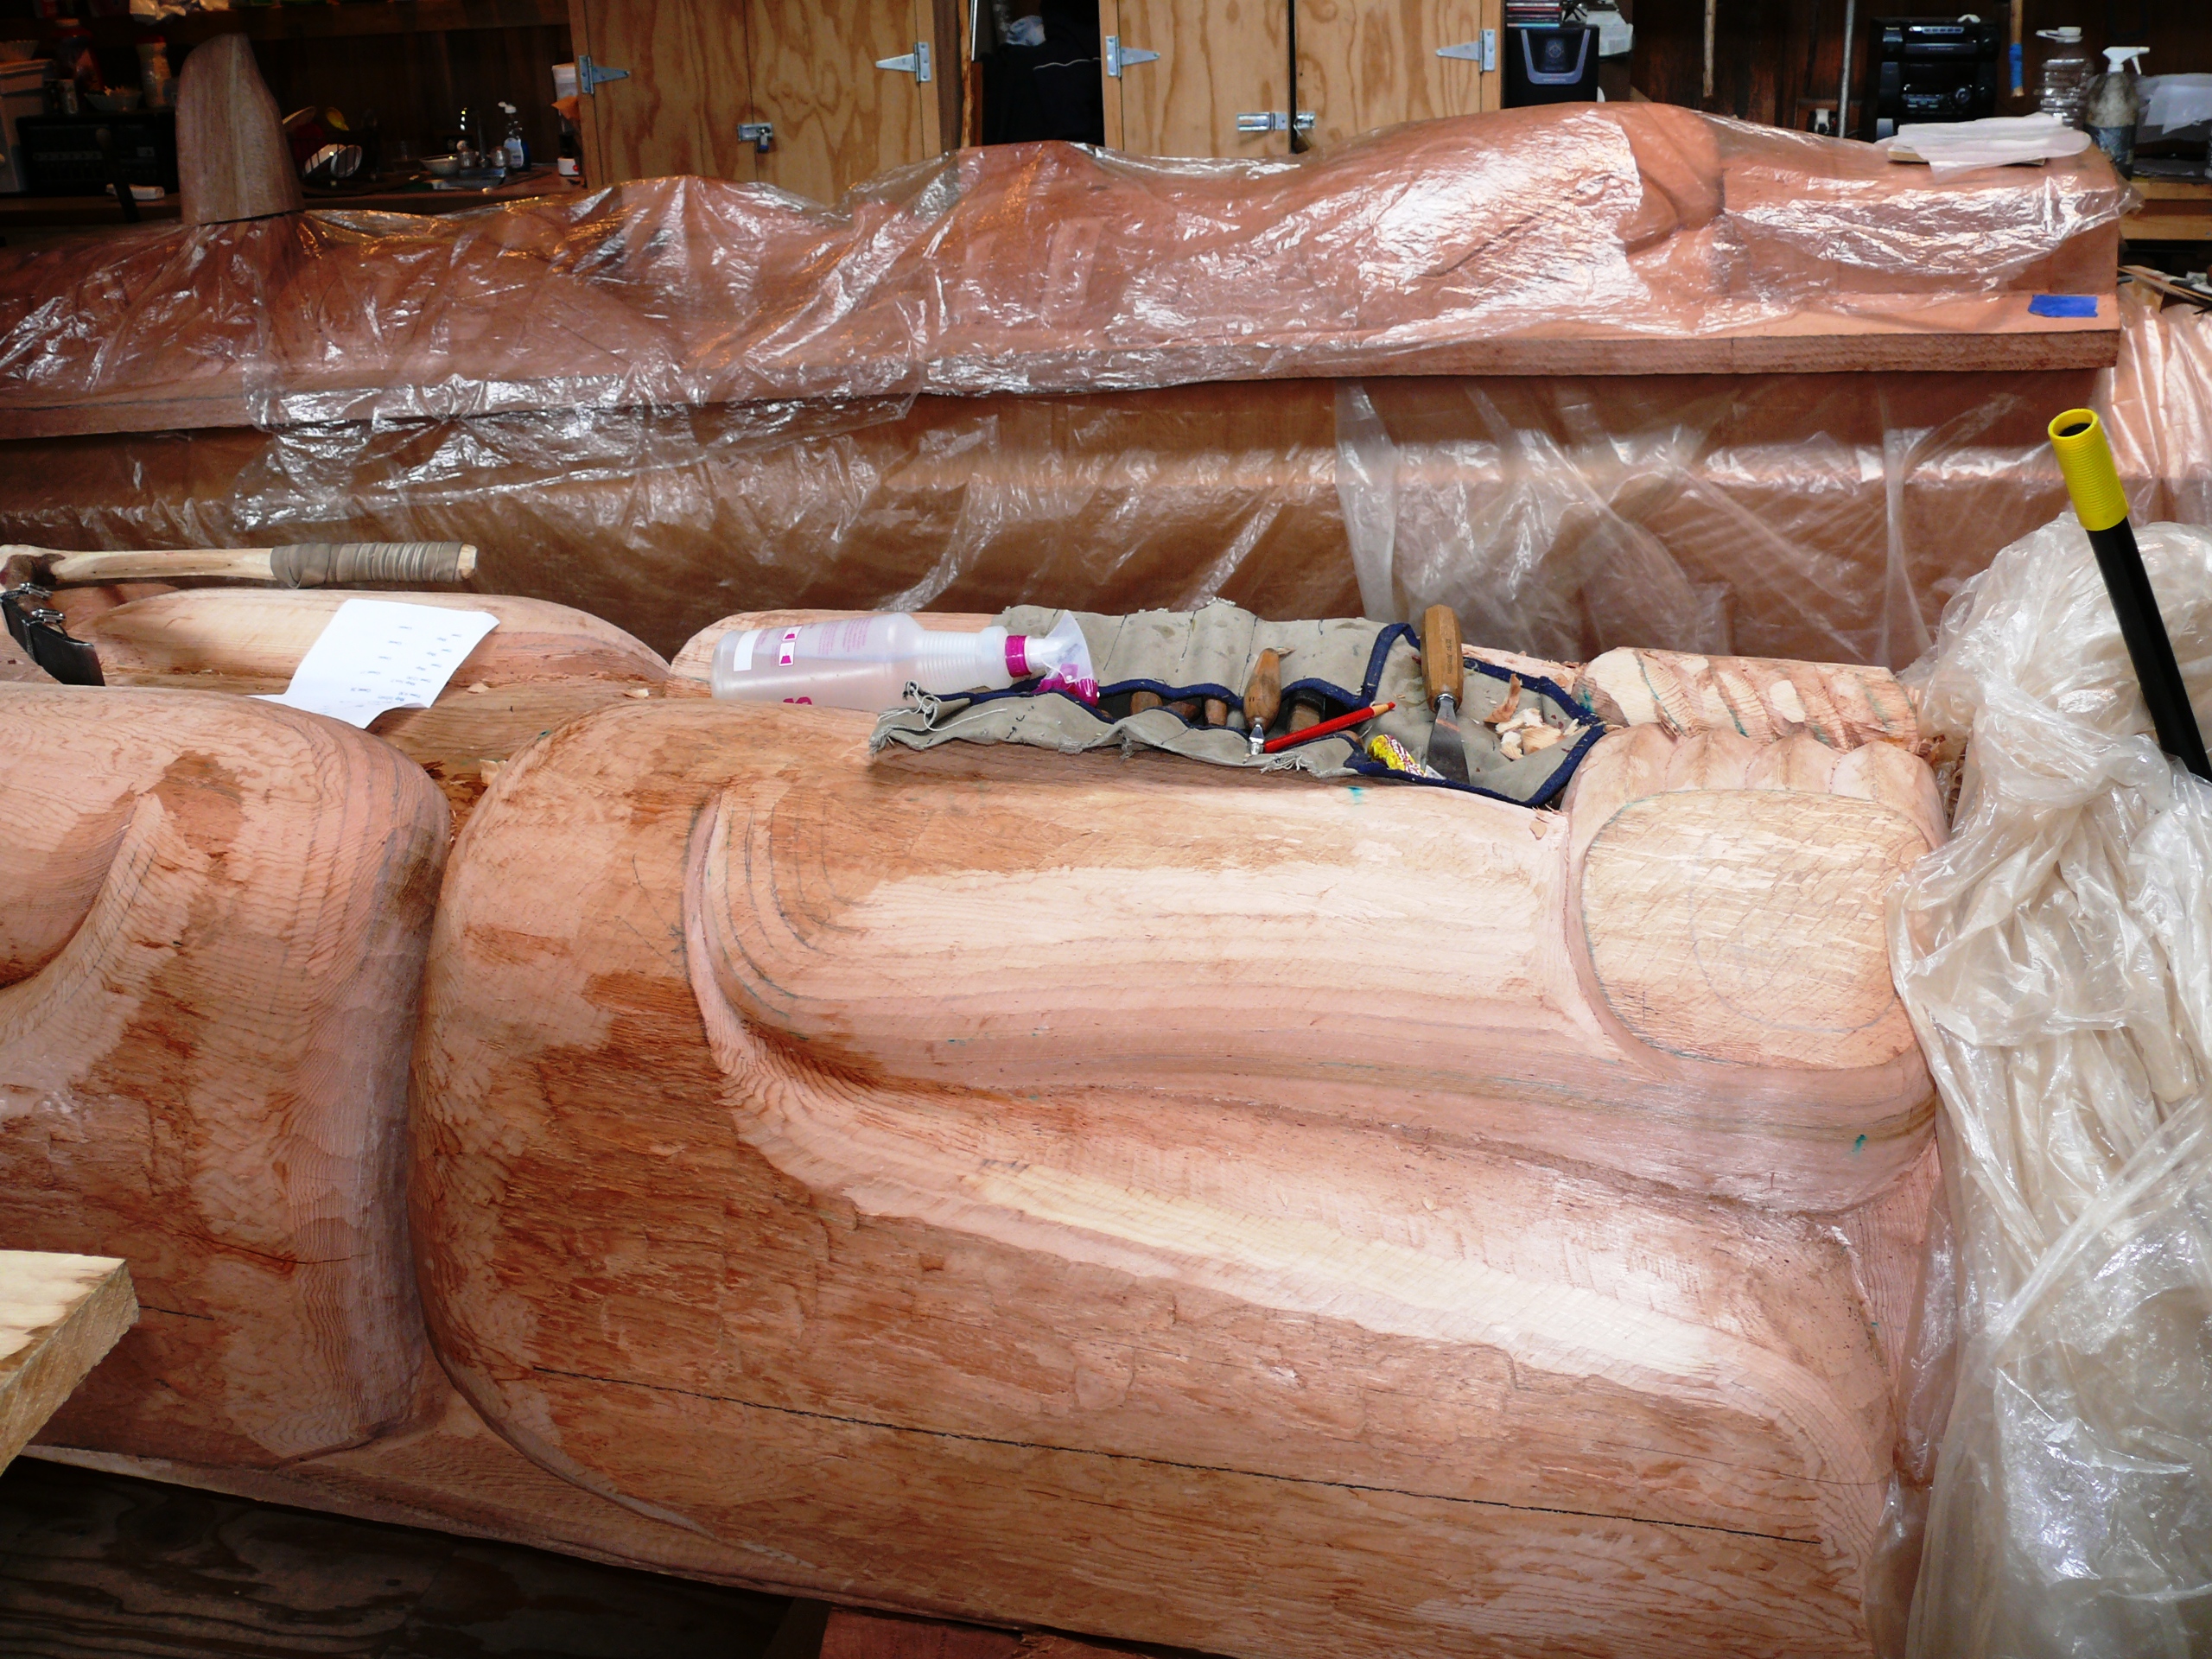 Woodworking tools sit at the ready on a current totem pole carving.